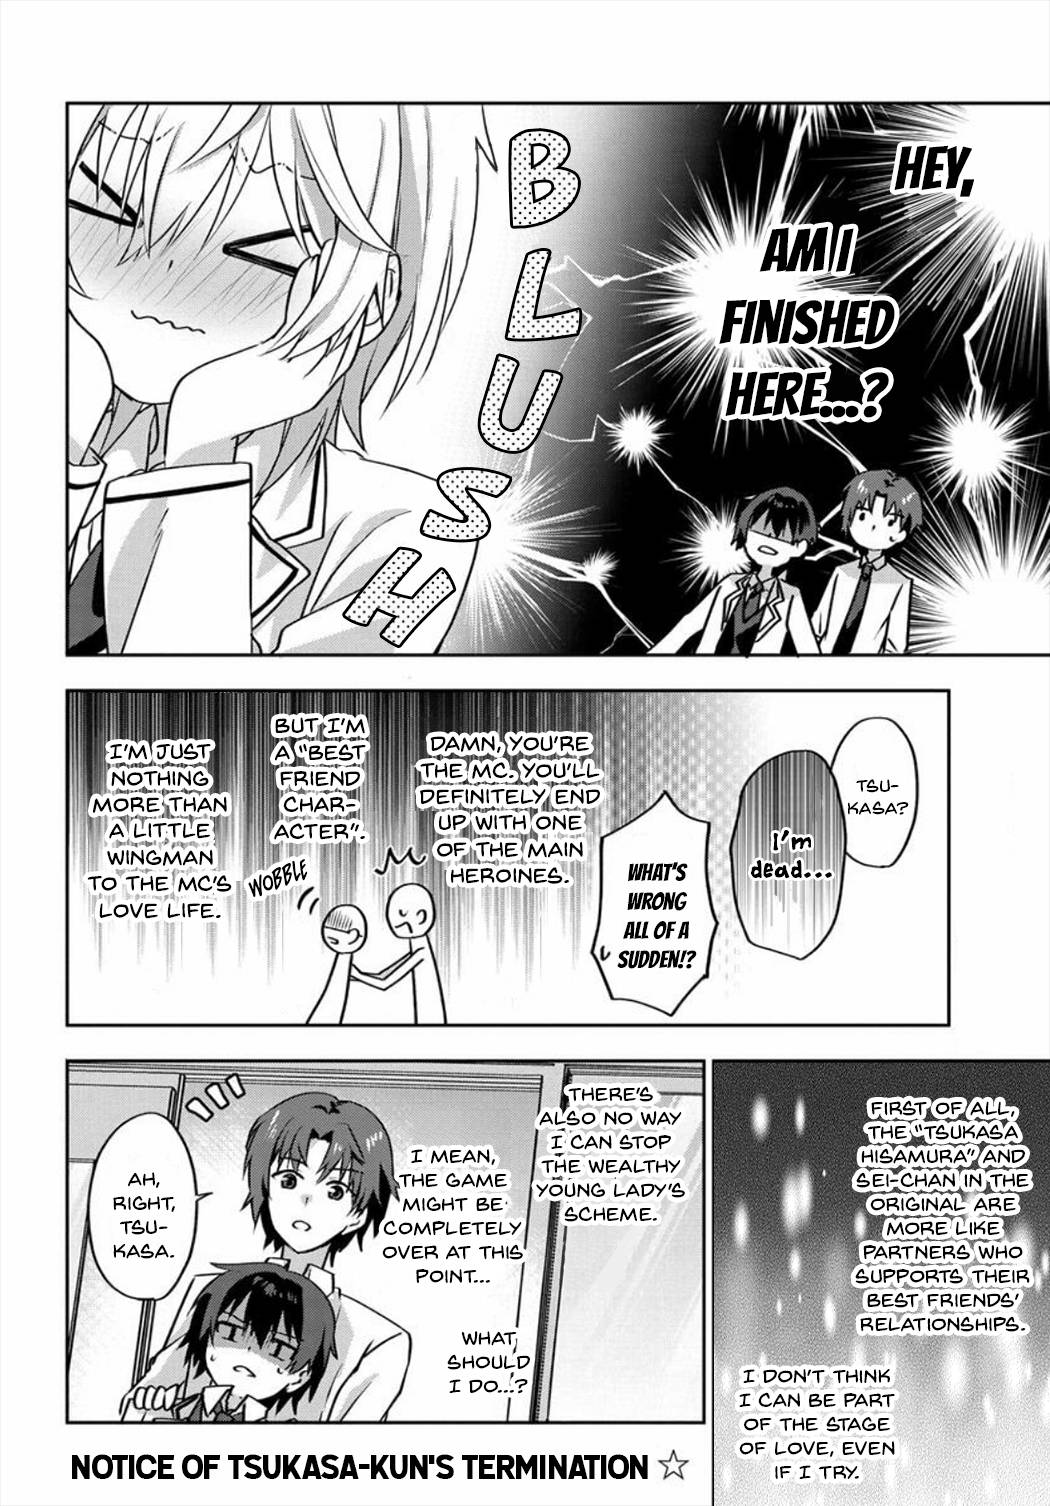 Since I’ve Entered the World of Romantic Comedy Manga, I’ll Do My Best to Make the Losing Heroine Happy. - chapter 3.2 - #1